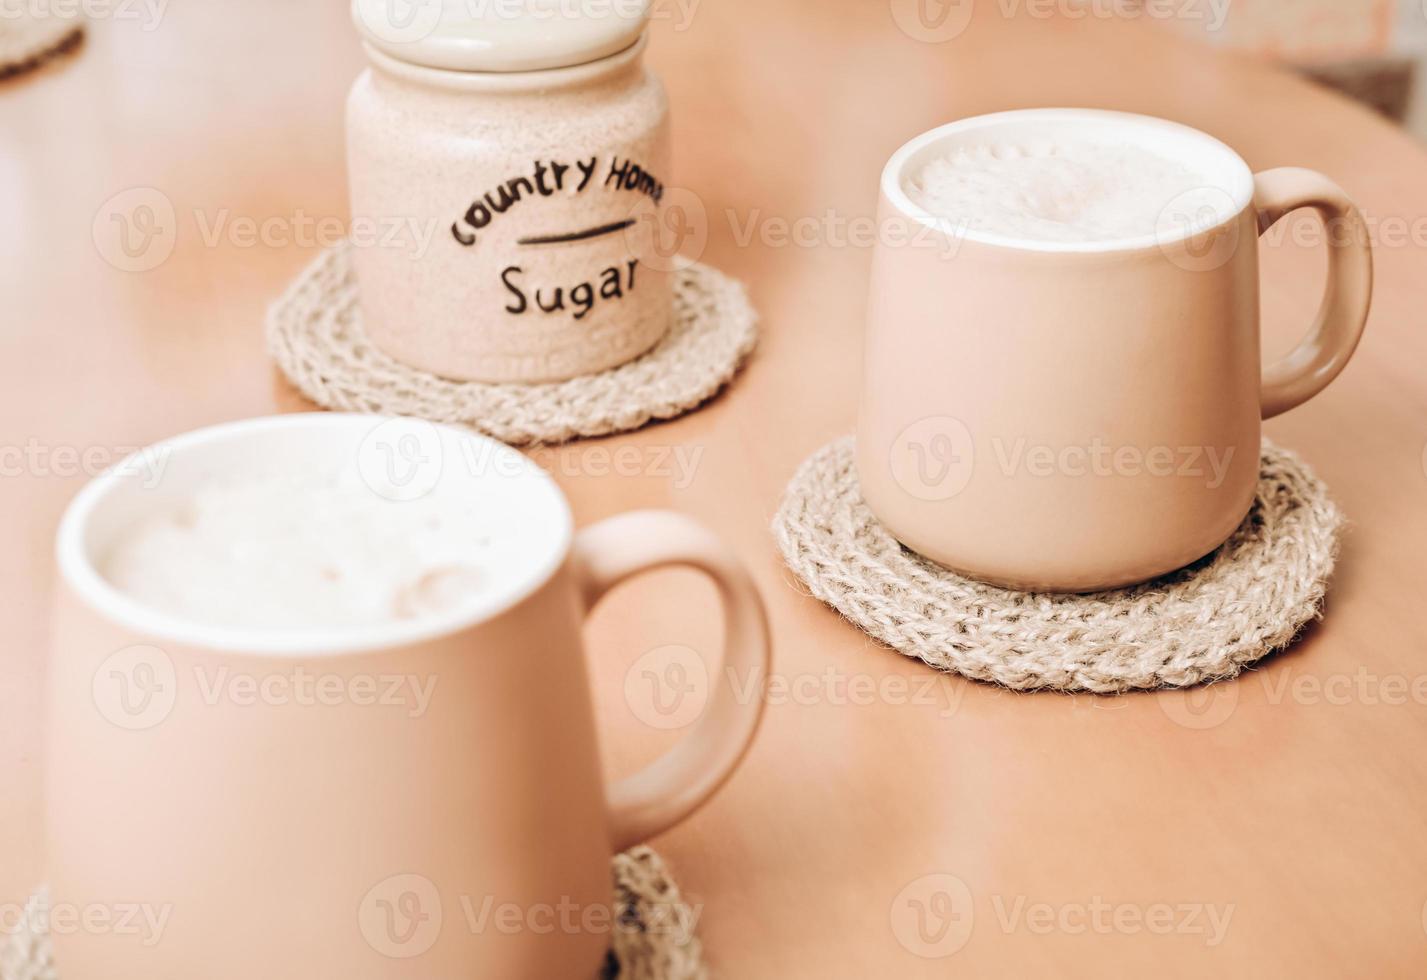 coffee mugs on a jute coasters on a table. hand made knitted kitchen accessories. natural home decor. photo